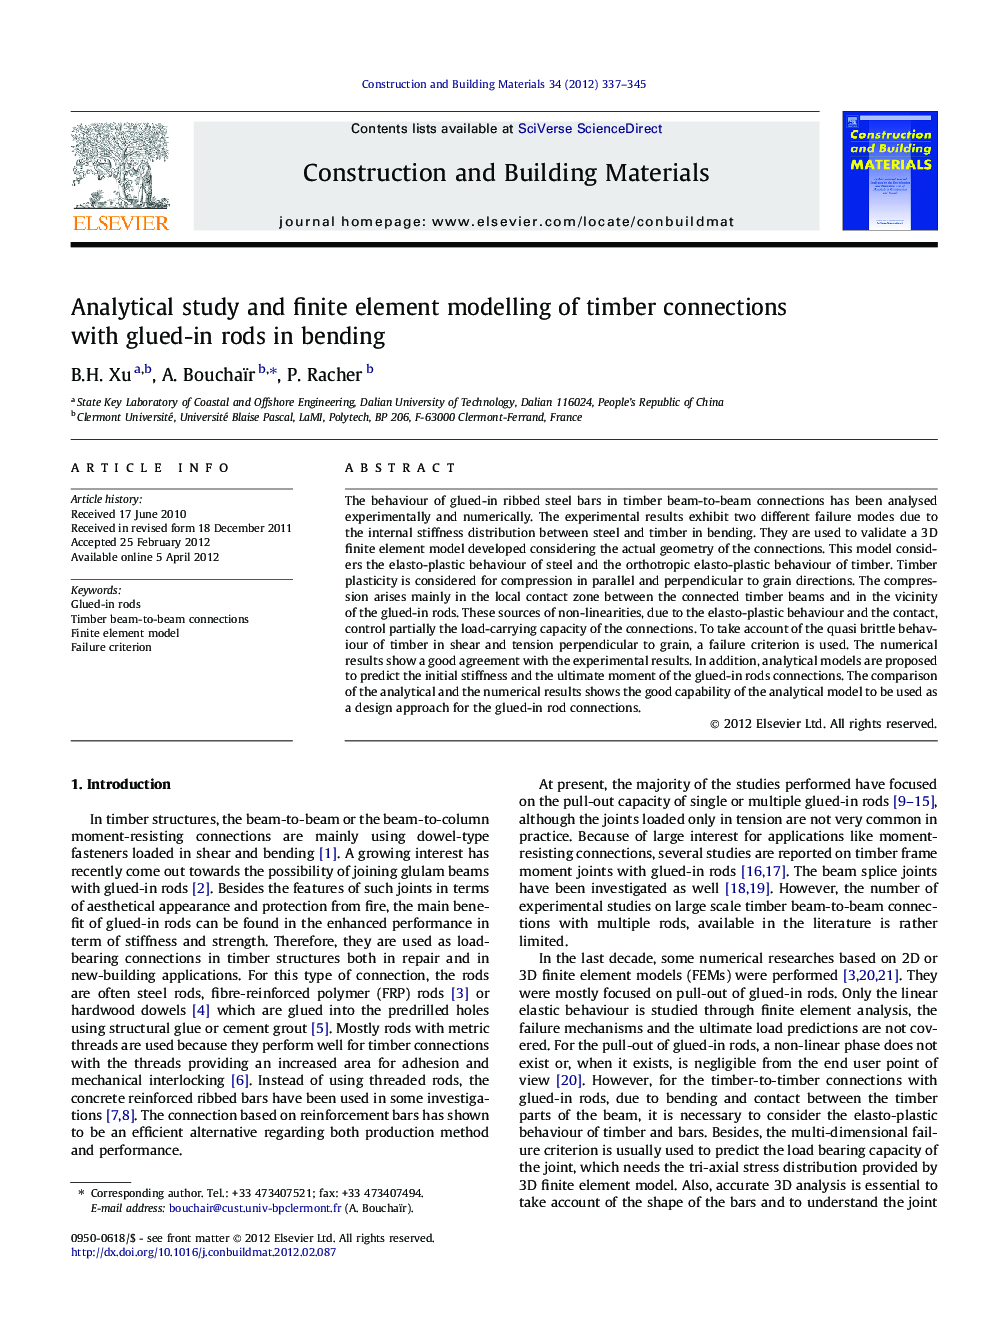 Analytical study and finite element modelling of timber connections with glued-in rods in bending